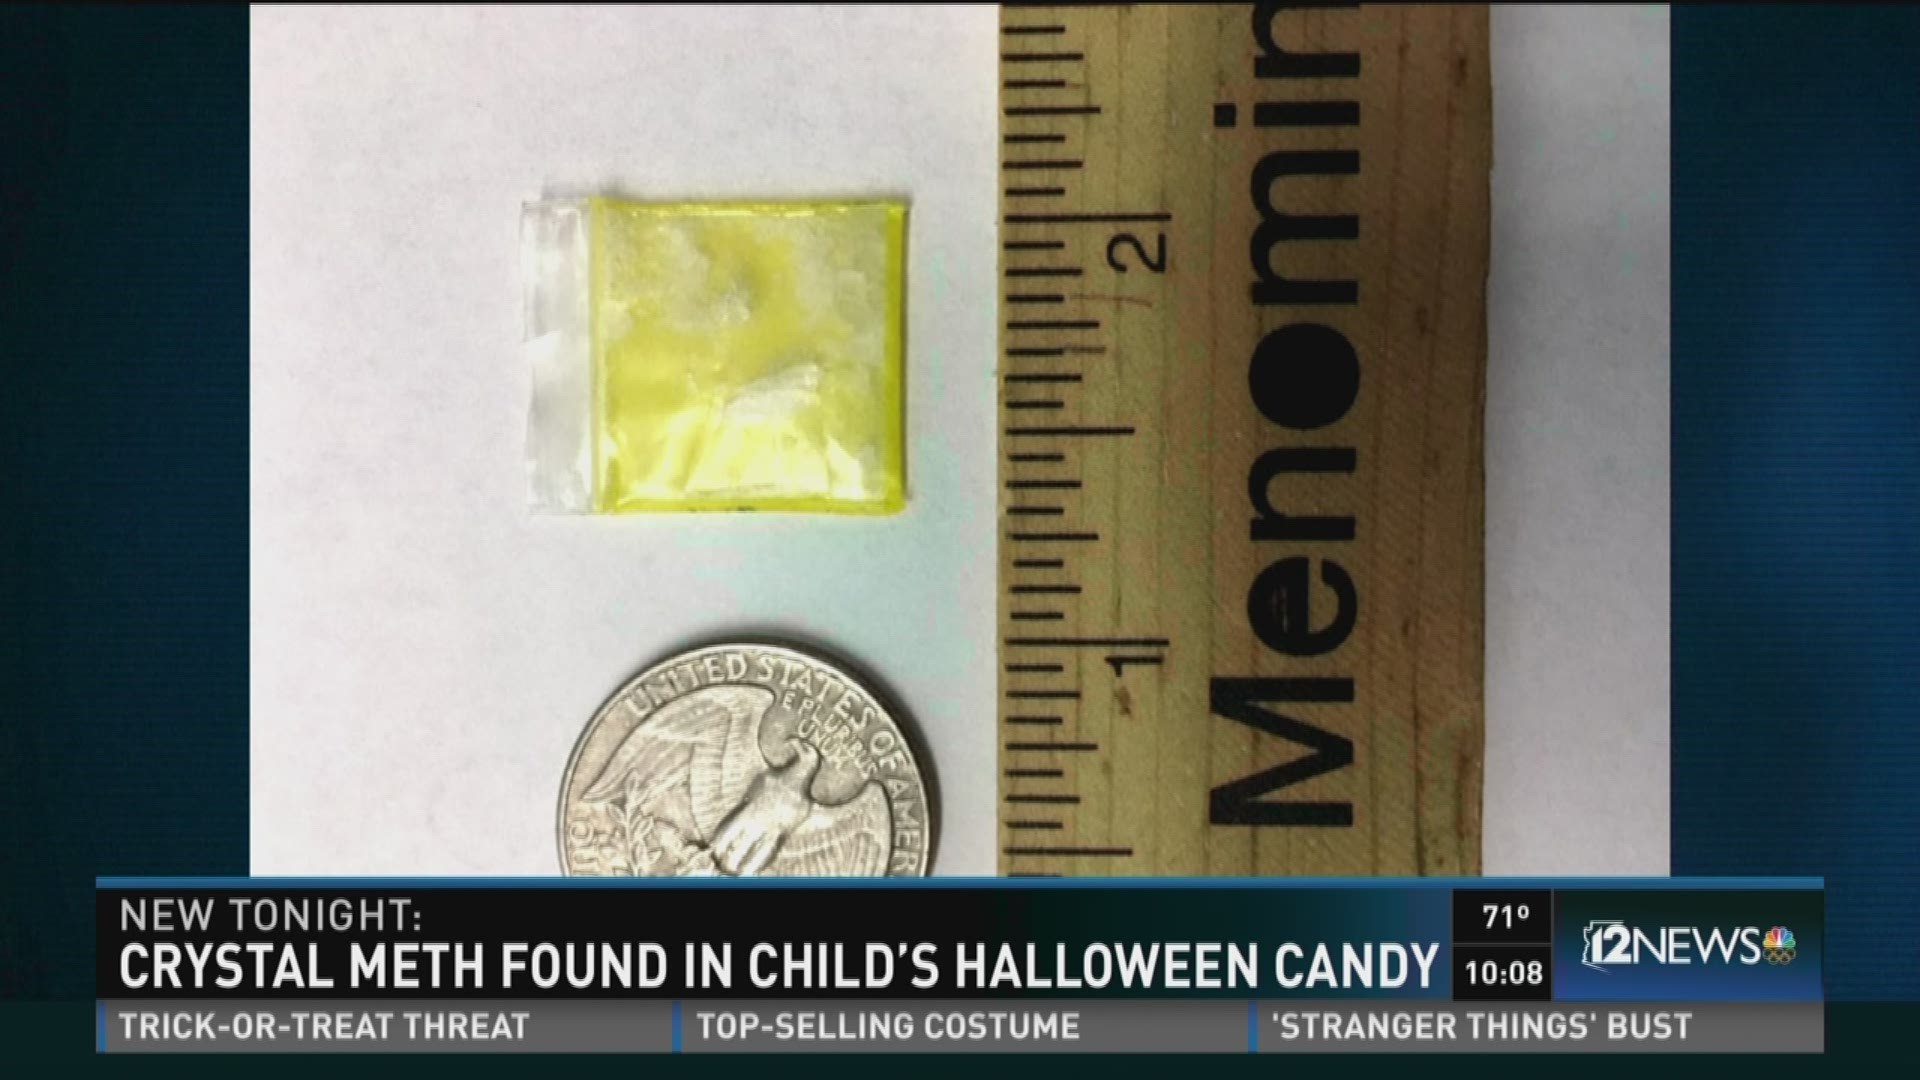 While parents should inspect their children's candy, concerns of marijuana-laced candy may be nothing more than a Halloween scare tactic.